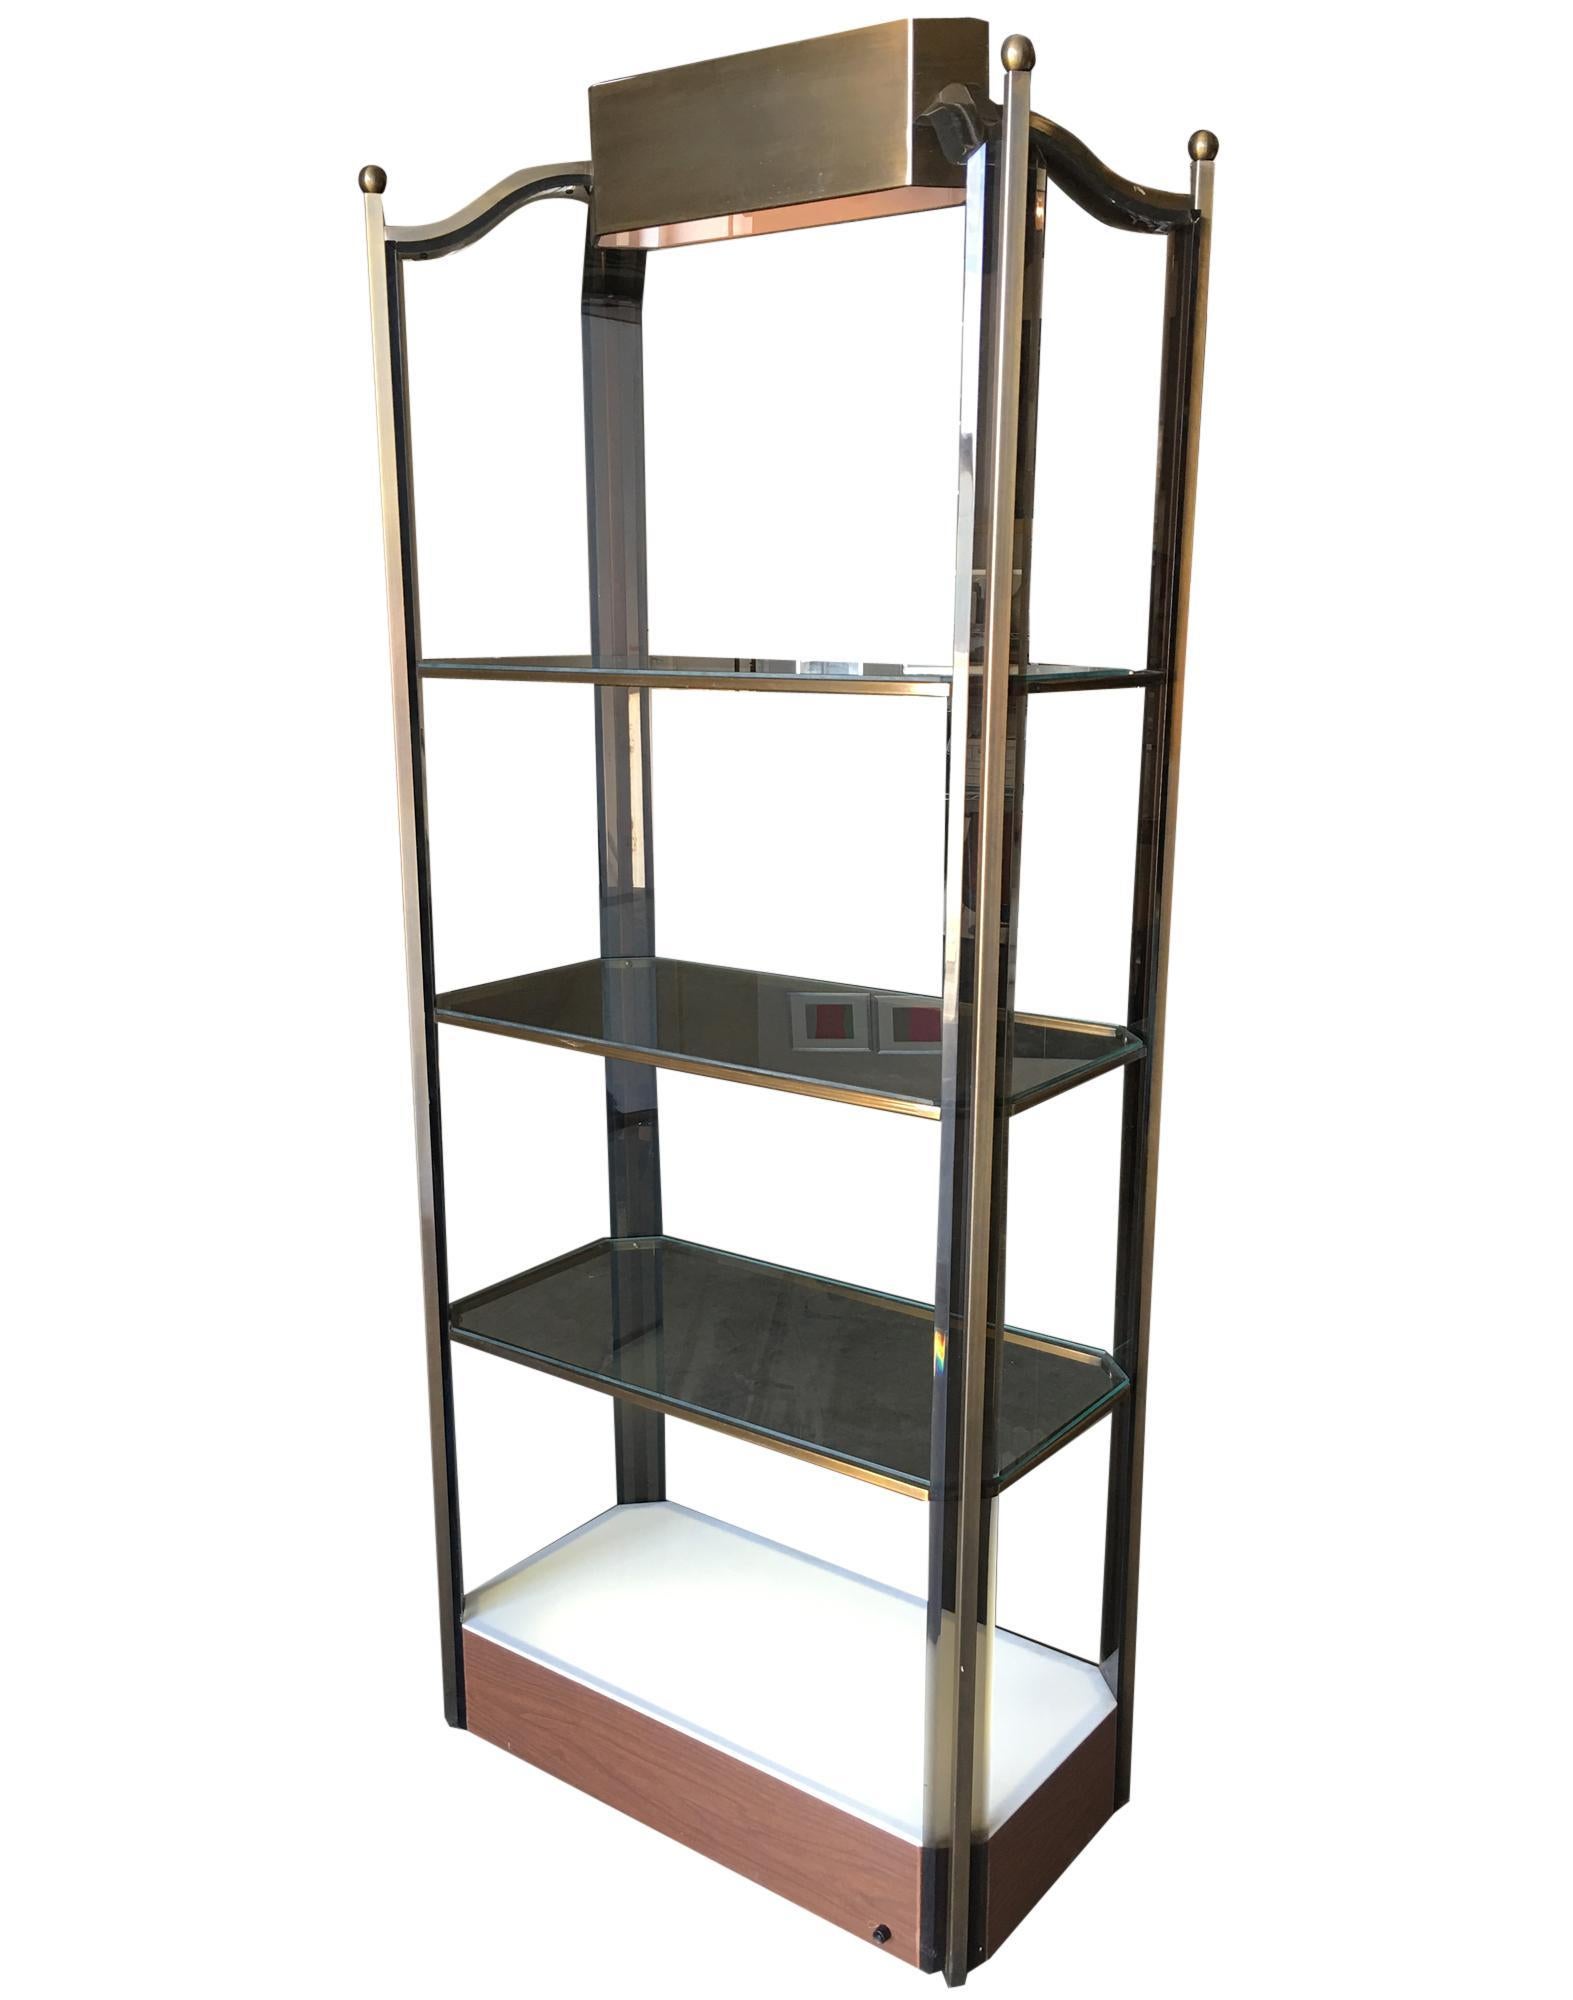 Vintage Disco era glass light-up etagere with bronze wash frame and smoked acrylic accents. The shelf features a unique light-up base and a large spotlight on the top. This piece is in excellent condition. Circa 1970s.

Dimensions: 79